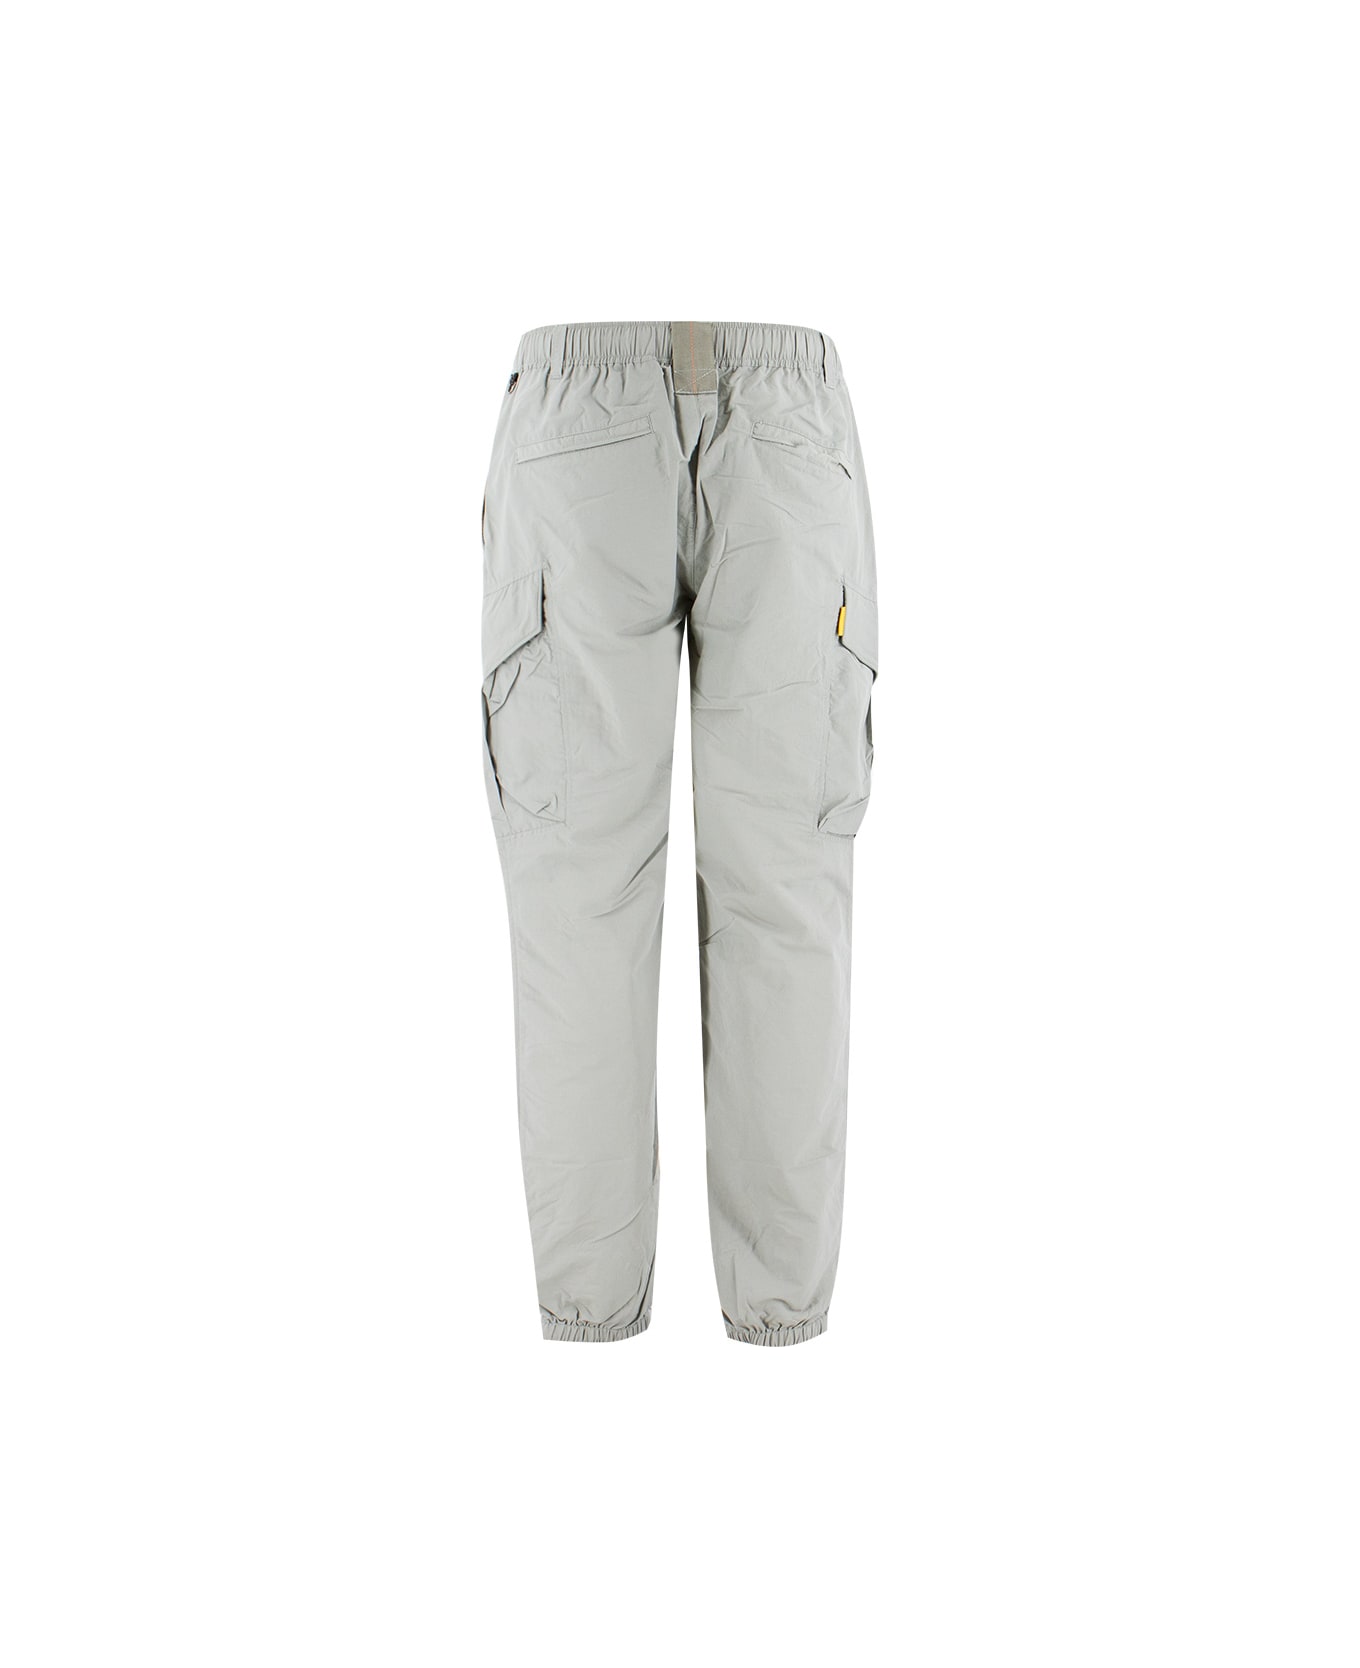 Parajumpers Trousers - SHADOW ボトムス